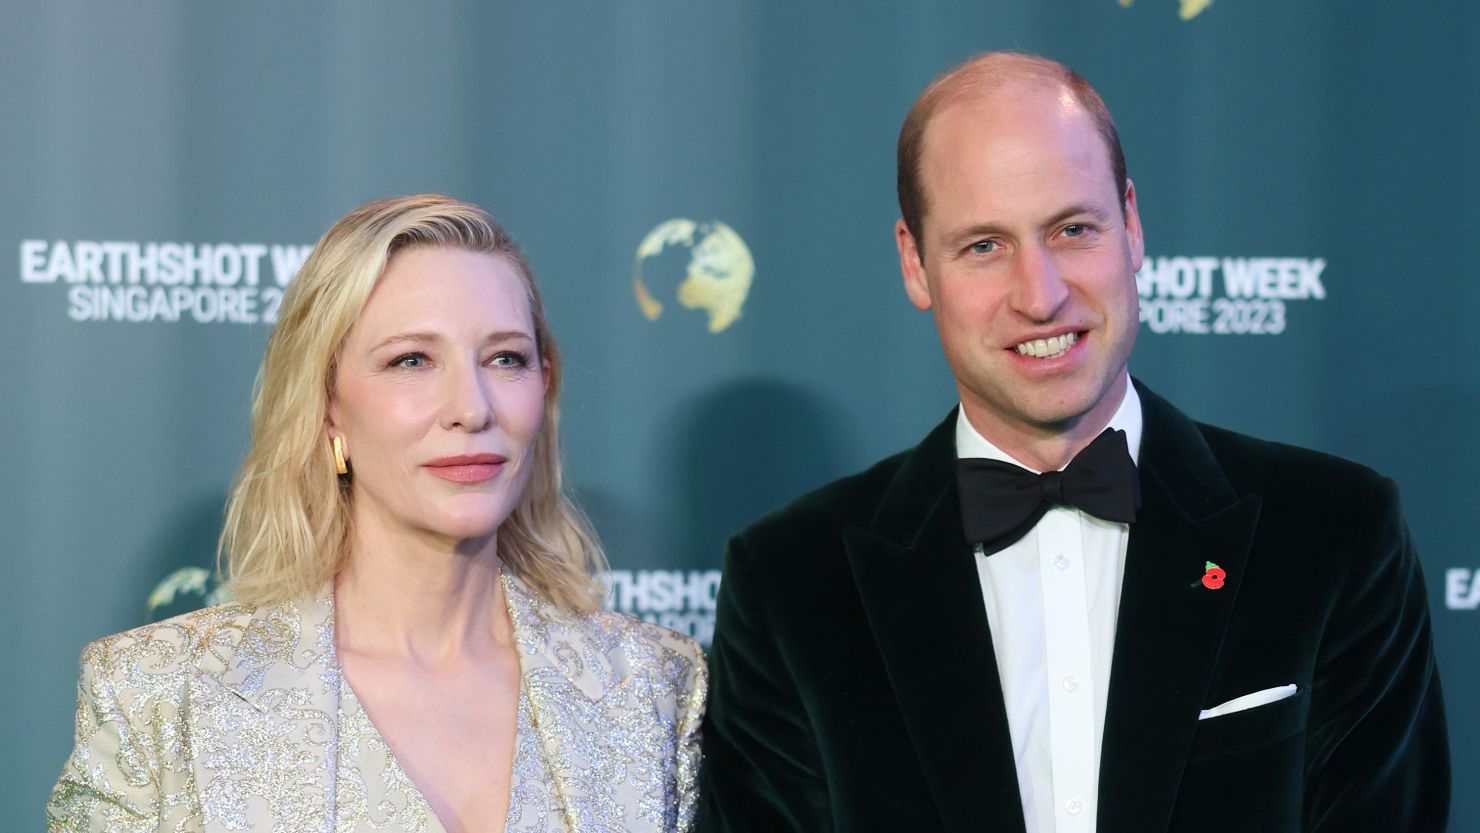 SINGAPORE, SINGAPORE - NOVEMBER 07: Cate Blanchett and Prince William, Prince of Wales attend the 2023 Earthshot Prize Awards Ceremony on November 07, 2023 in Singapore. The Earthshot Prize is awarded to five winners each year for their contributions to environmentalism. It was first awarded in 2021 and is planned to run annually until 2030. Each winner receives a grant of £1 million to continue their environmental work. (Photo by Chris Jackson/Getty Images)